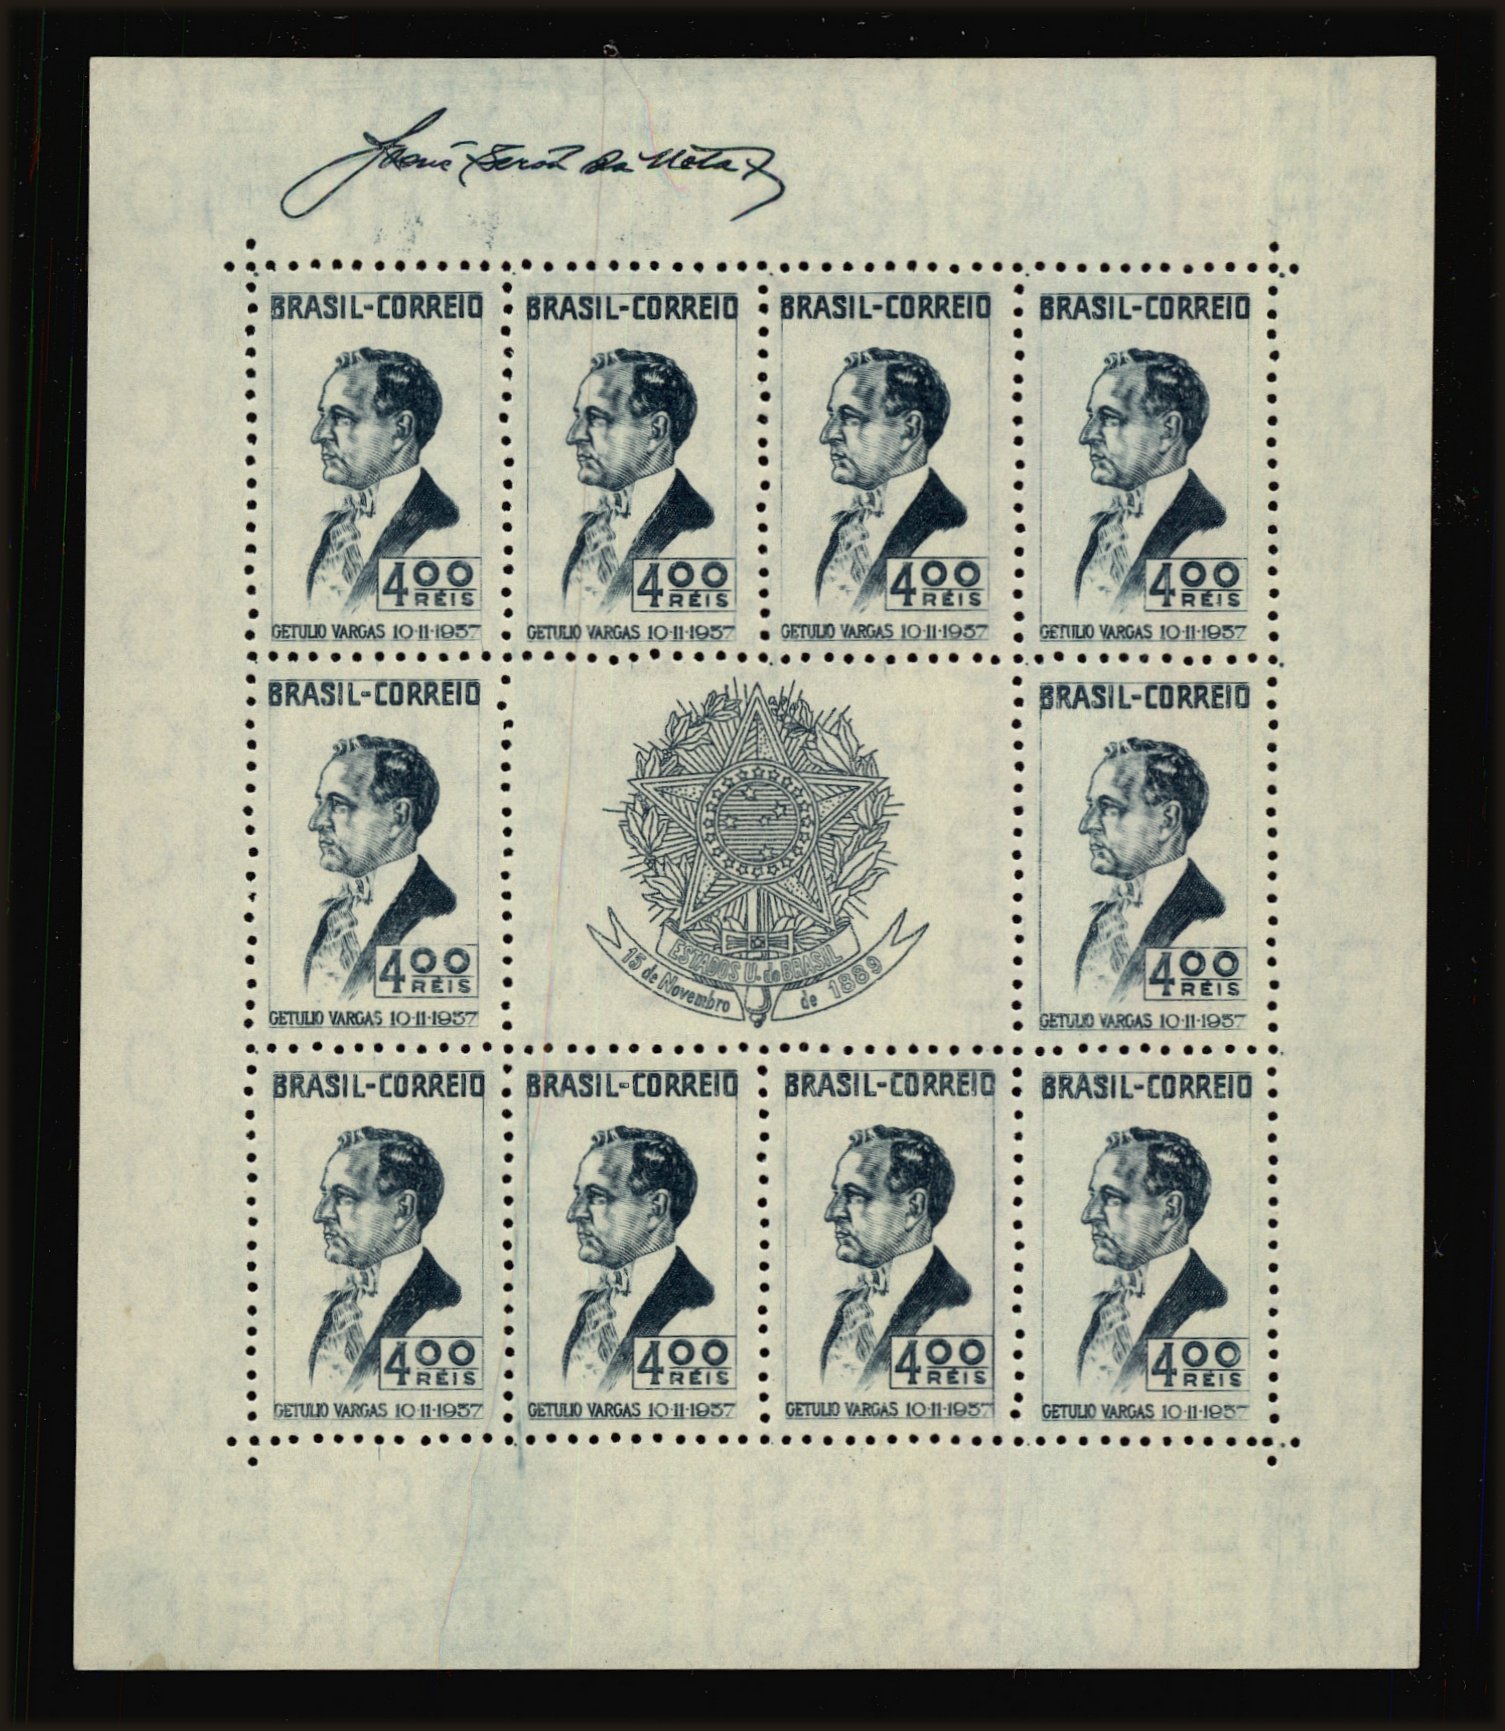 Front view of Brazil 466 collectors stamp